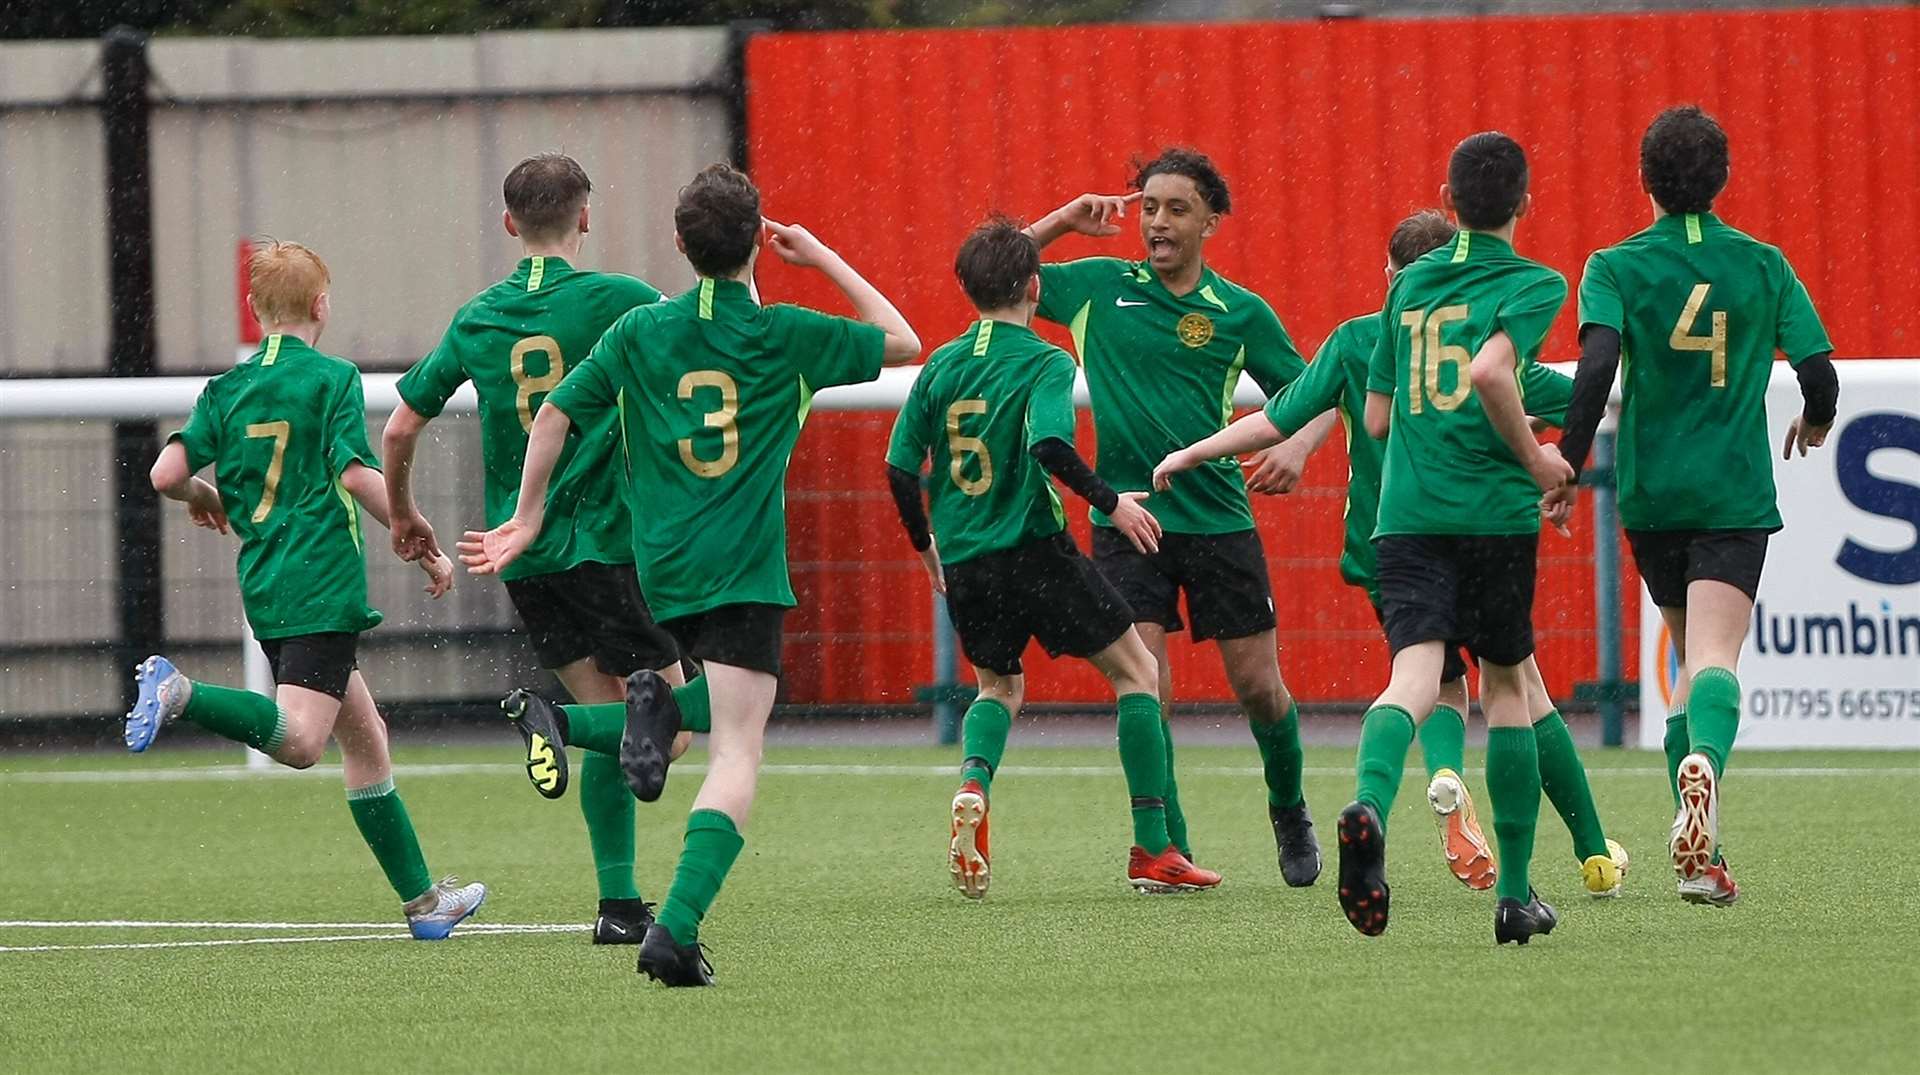 Sevenoaks Town celebrate taking the lead in the Kent Merit Under-13 Boys Cup Final. Picture: PSP Images